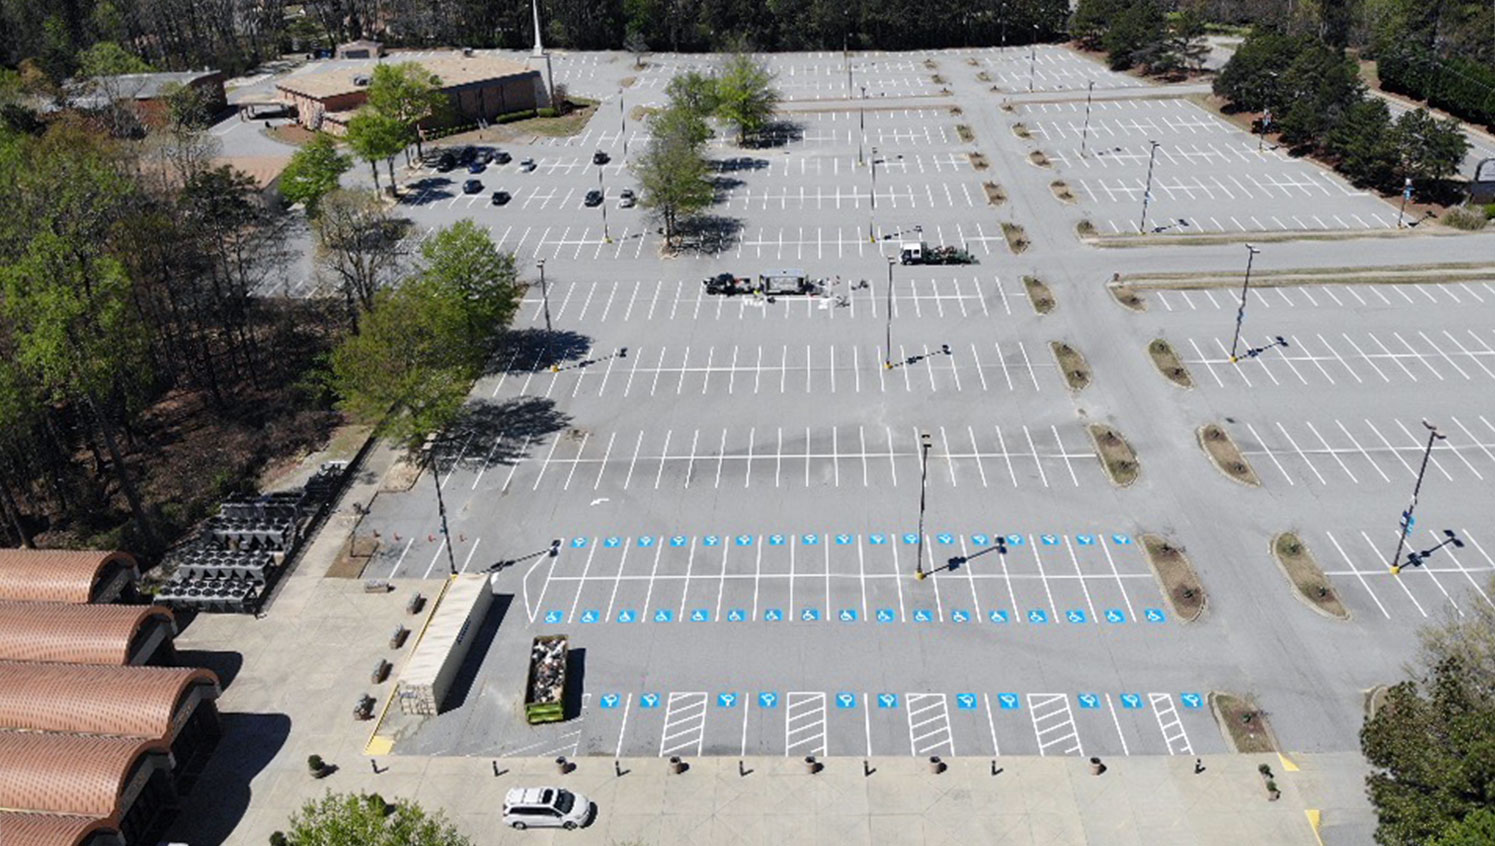 view of handicap accessible parking spaces at Worldchangers Intl Church in College Park, GA